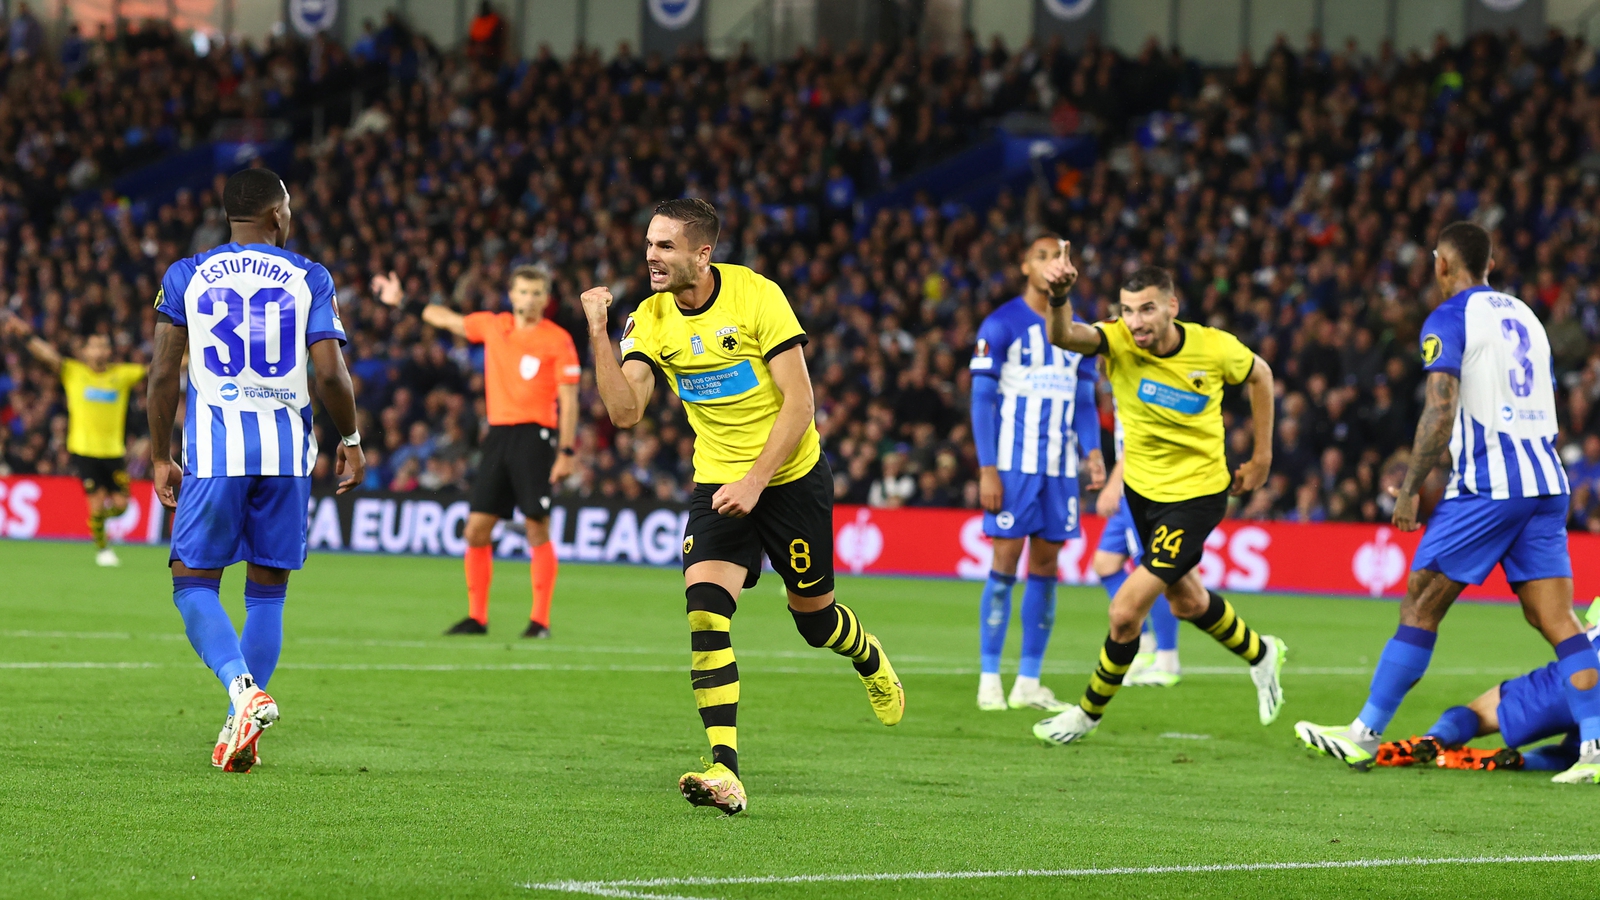 Late goal condemns Brighton to Europa League debut loss